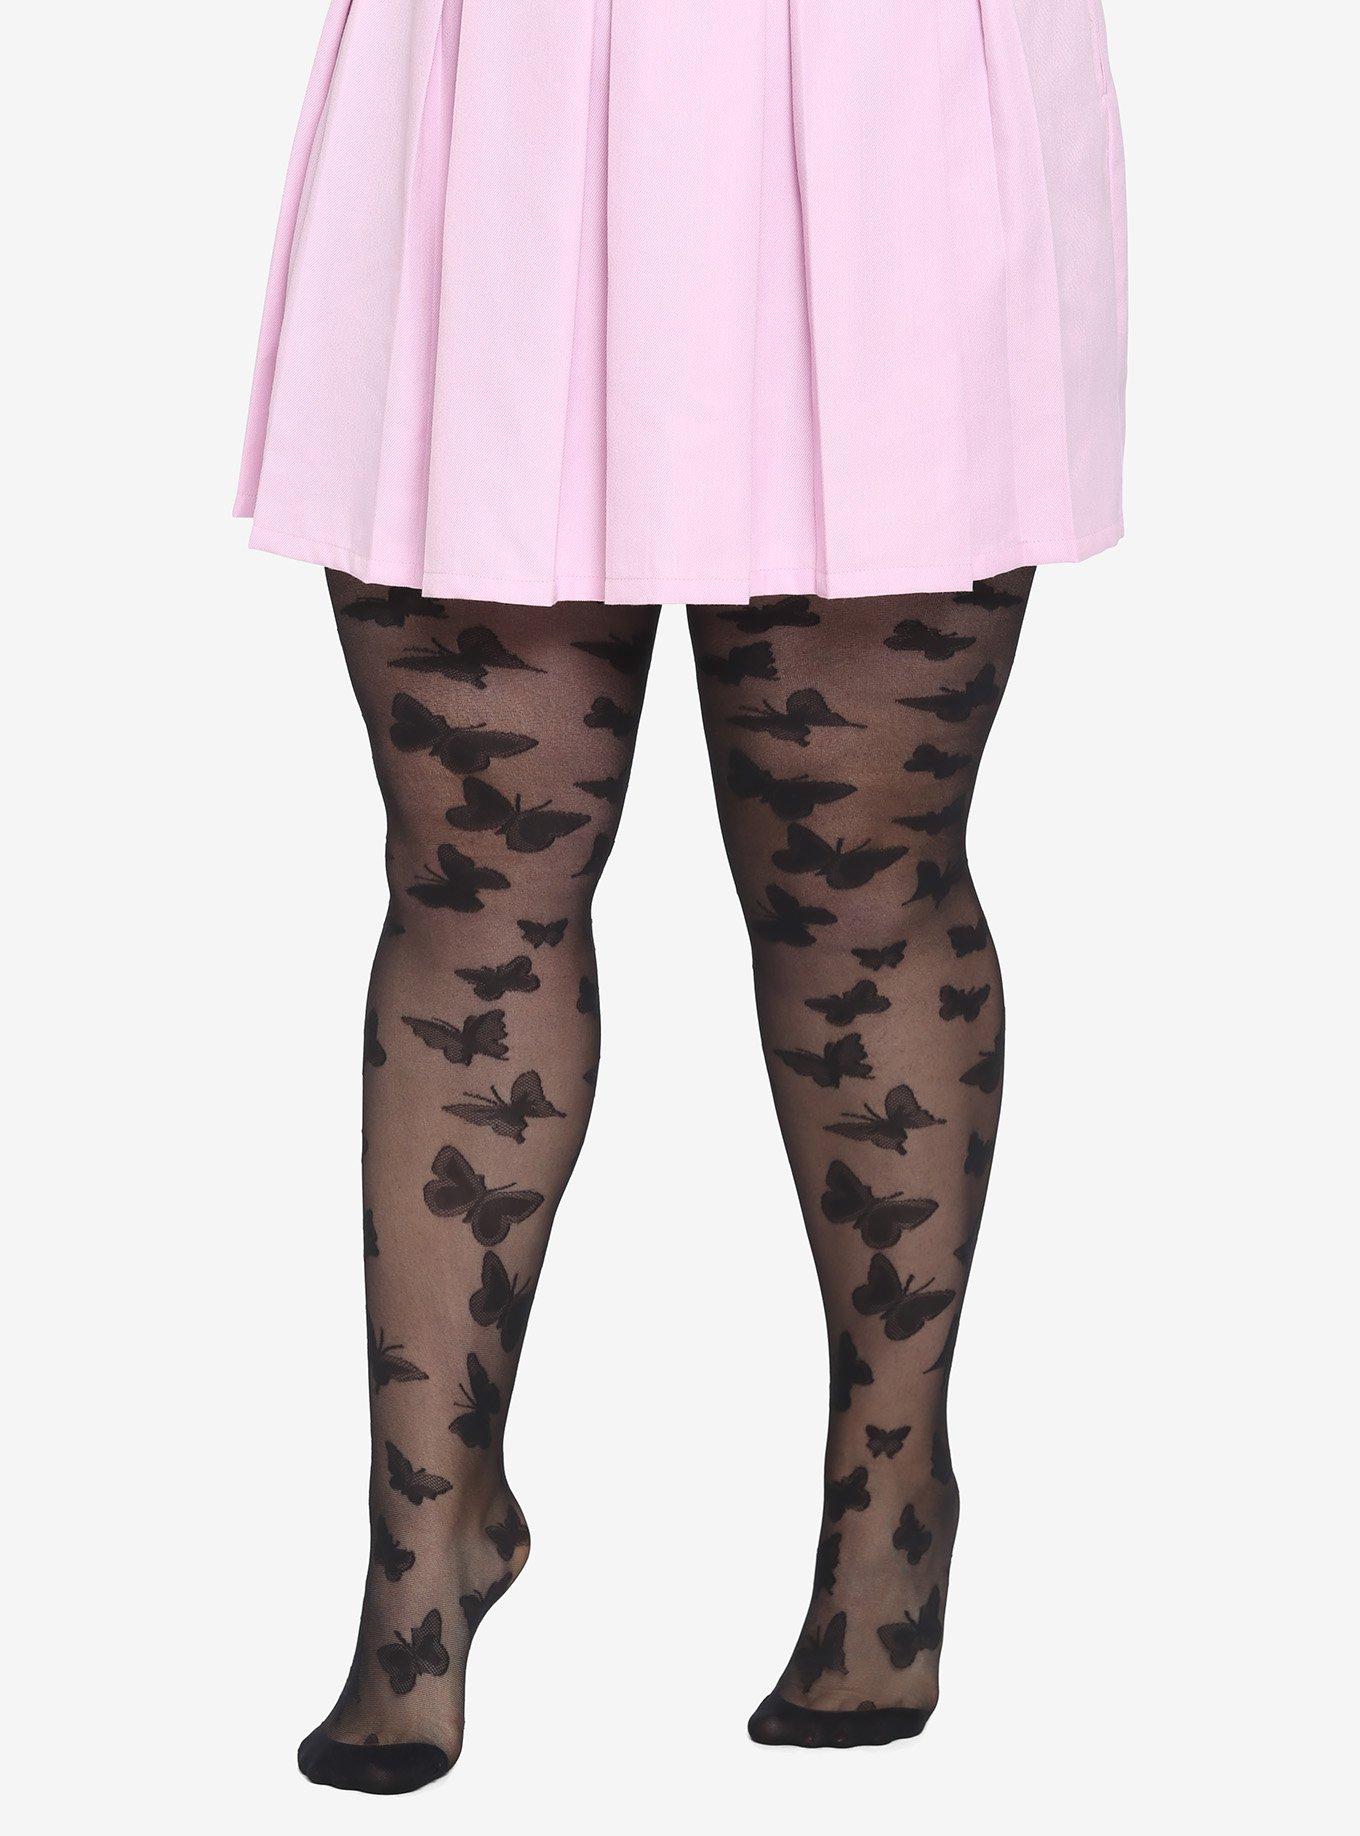 Purple Butterfly Tights, Hot Topic